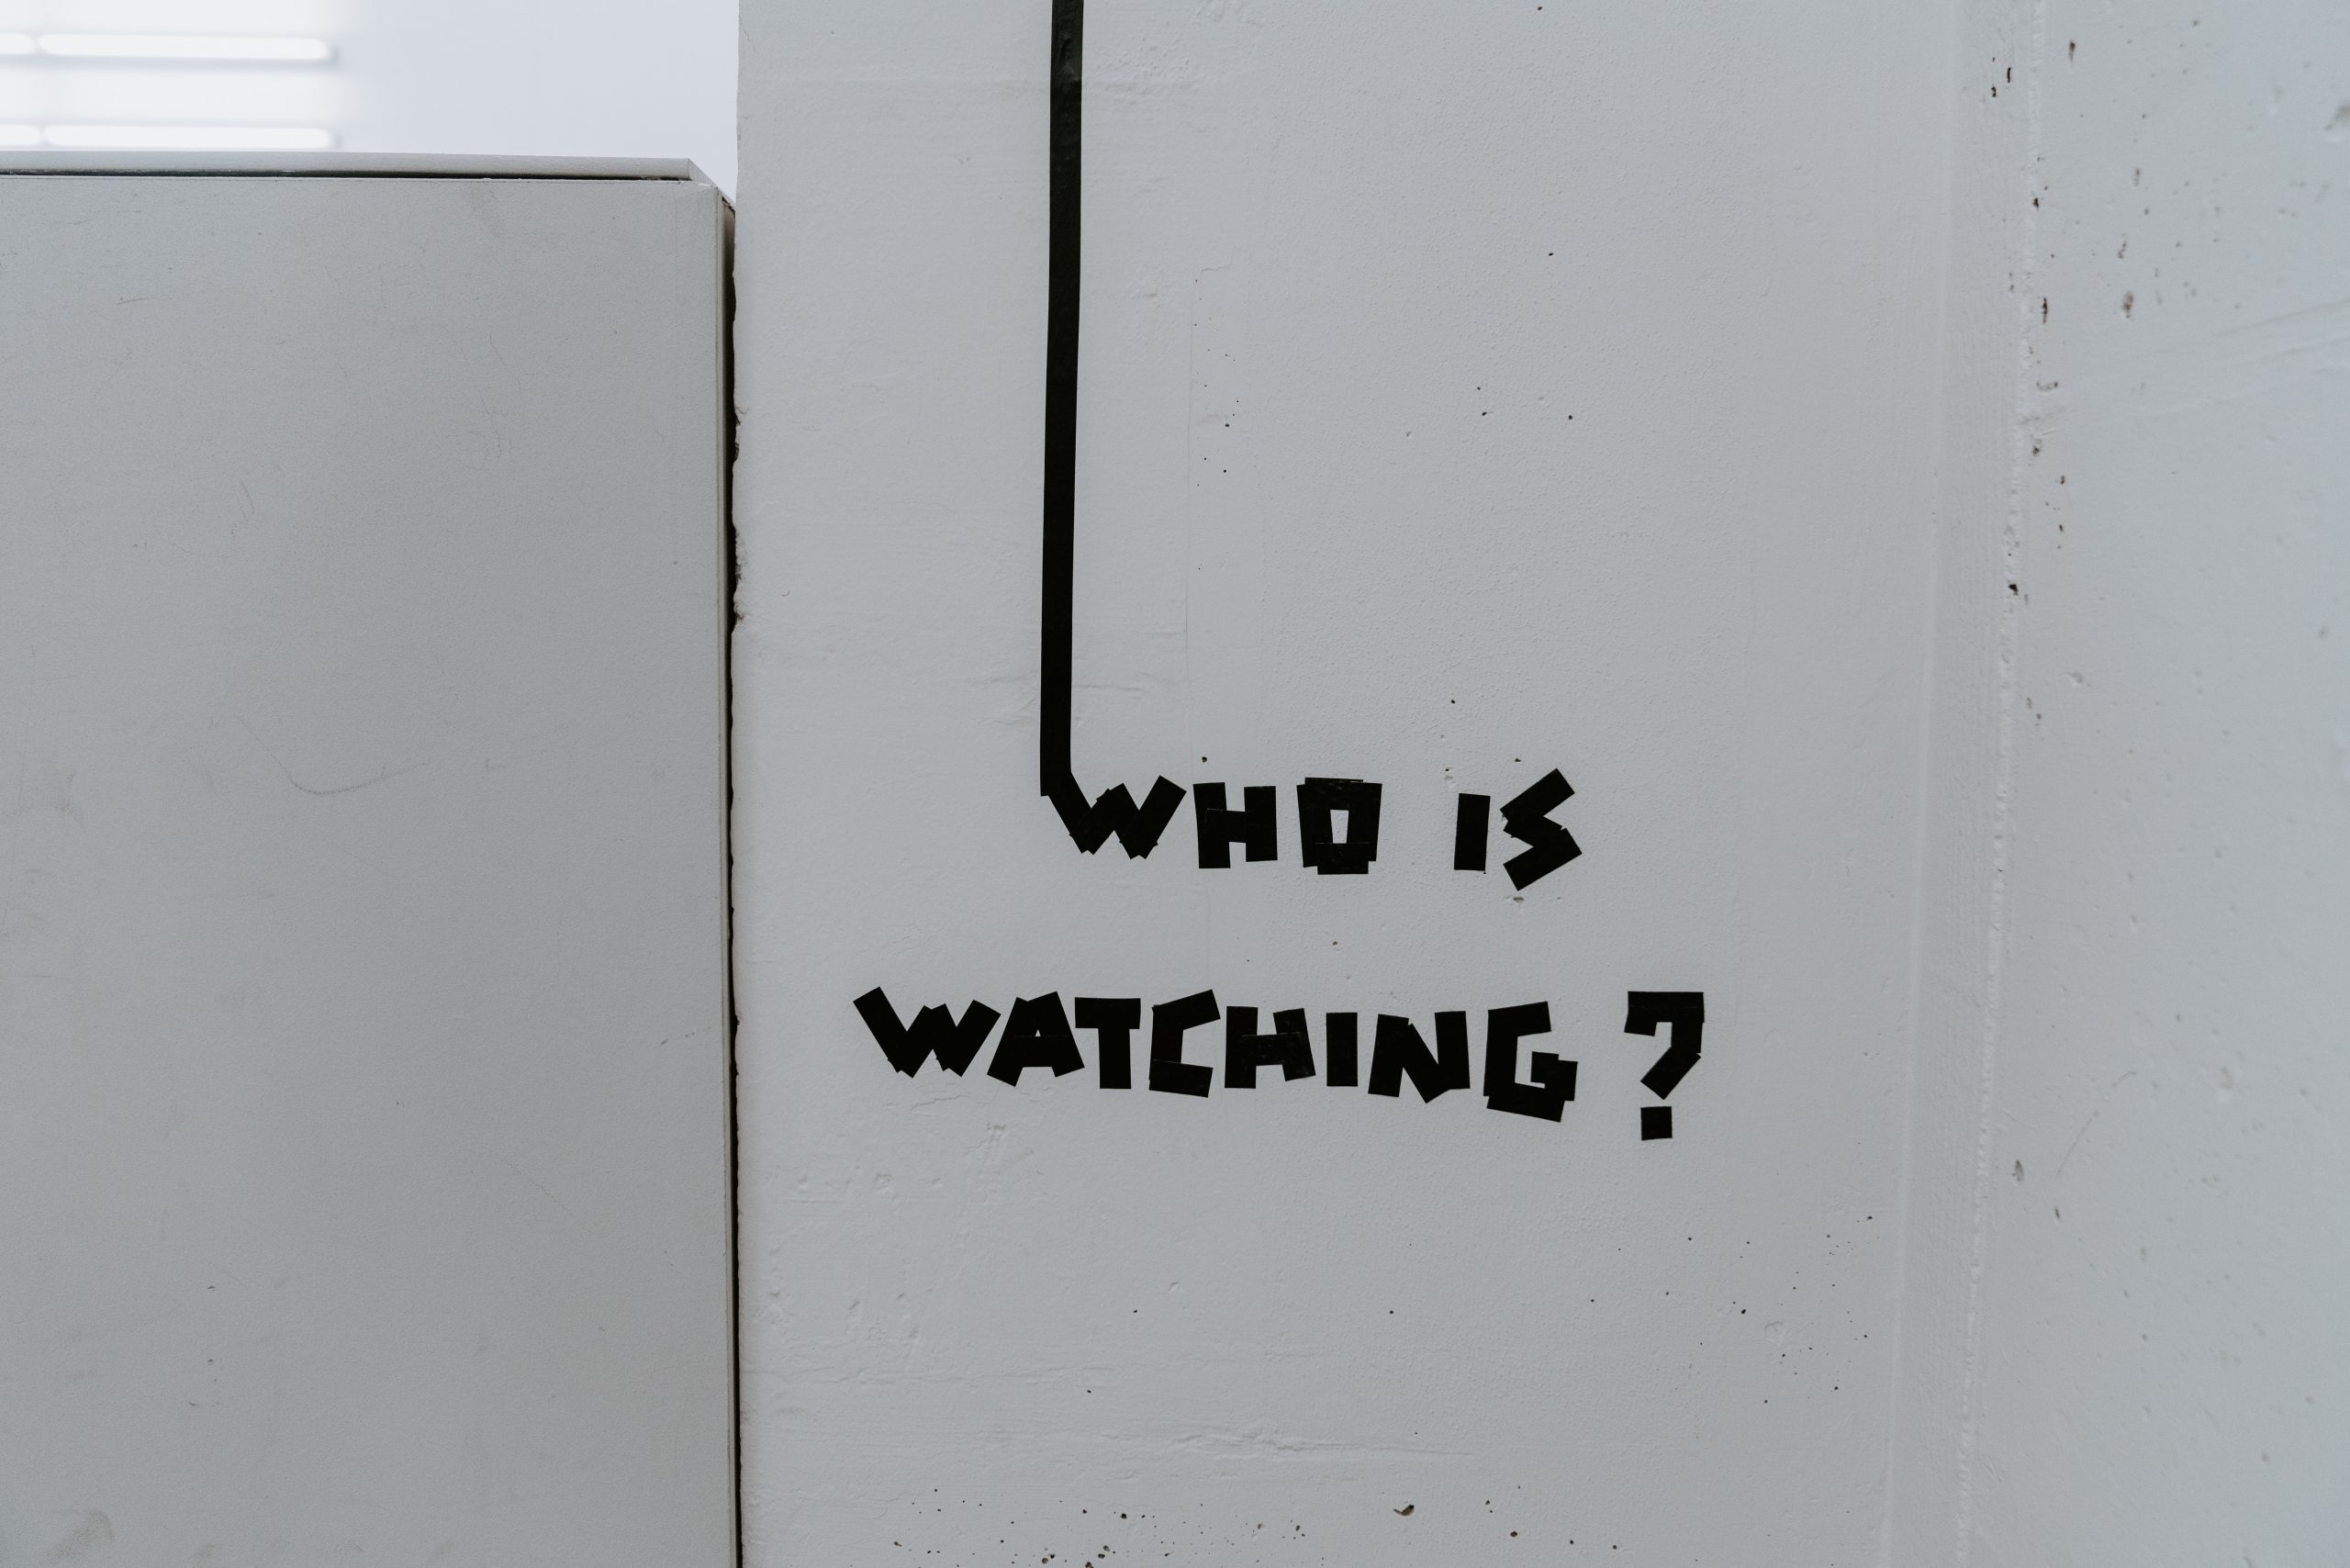 A white wall shows "Who is watching?" written in black ape.